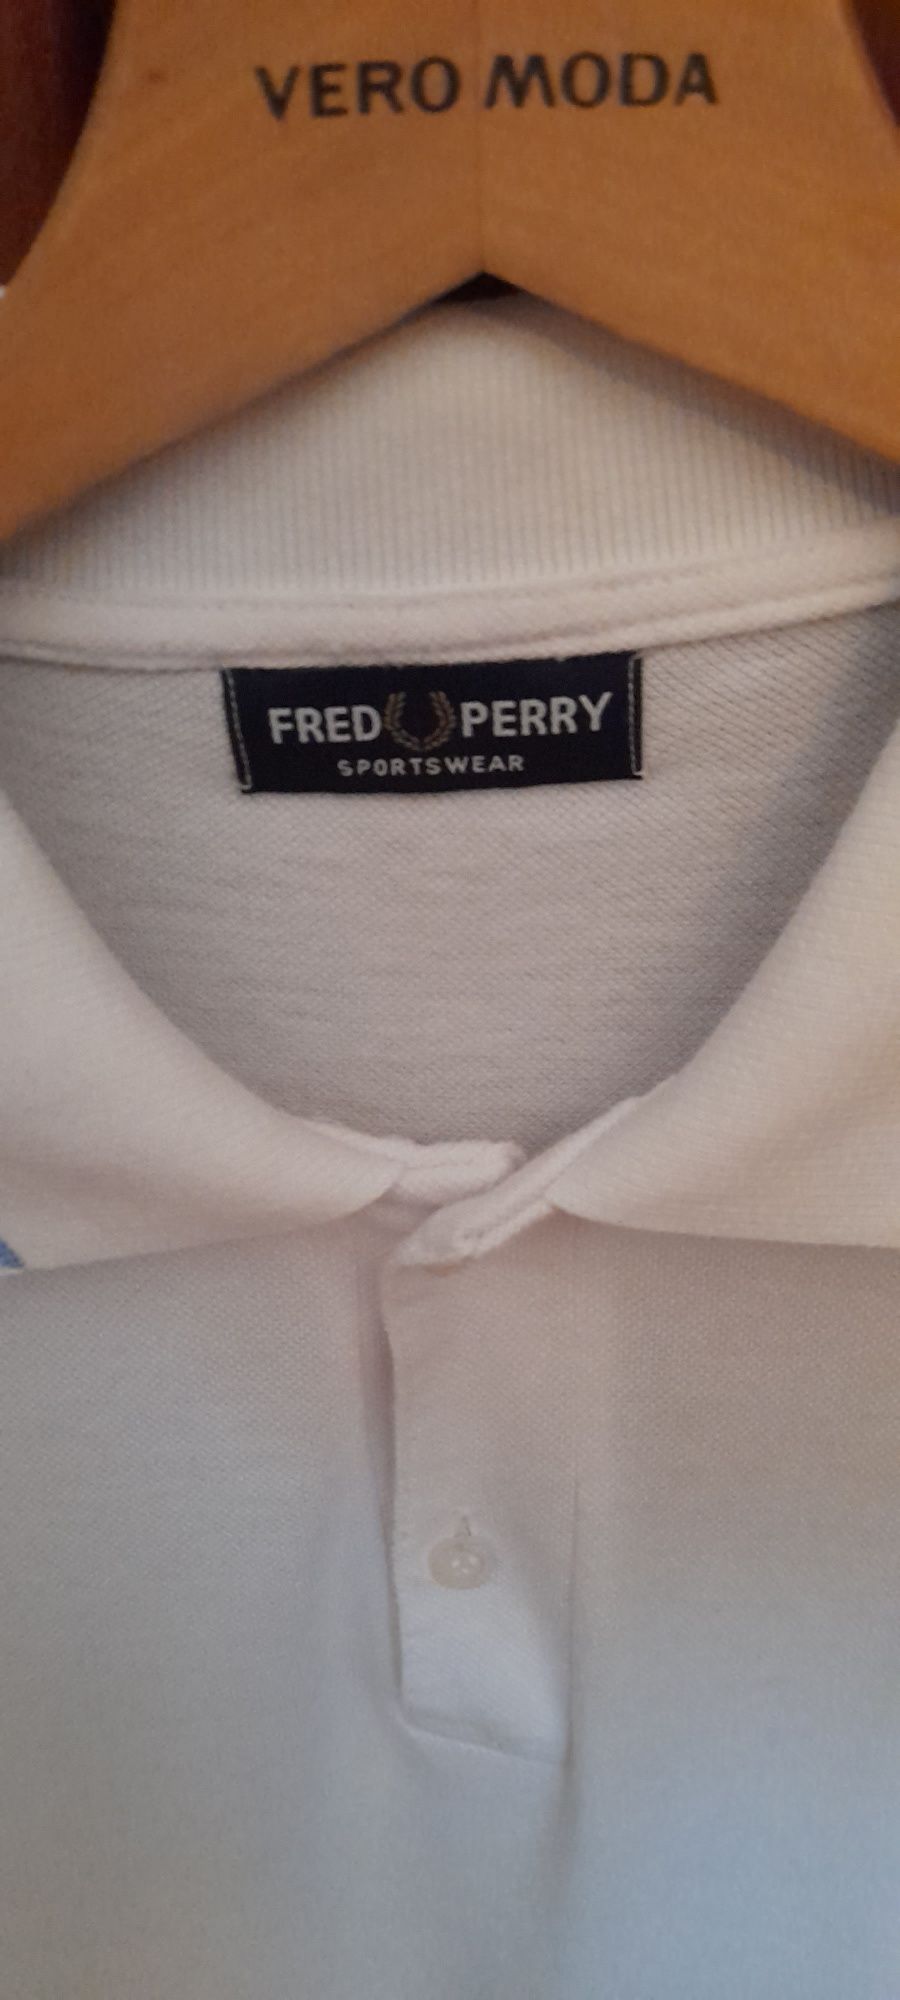 Polo t shirt fred perry